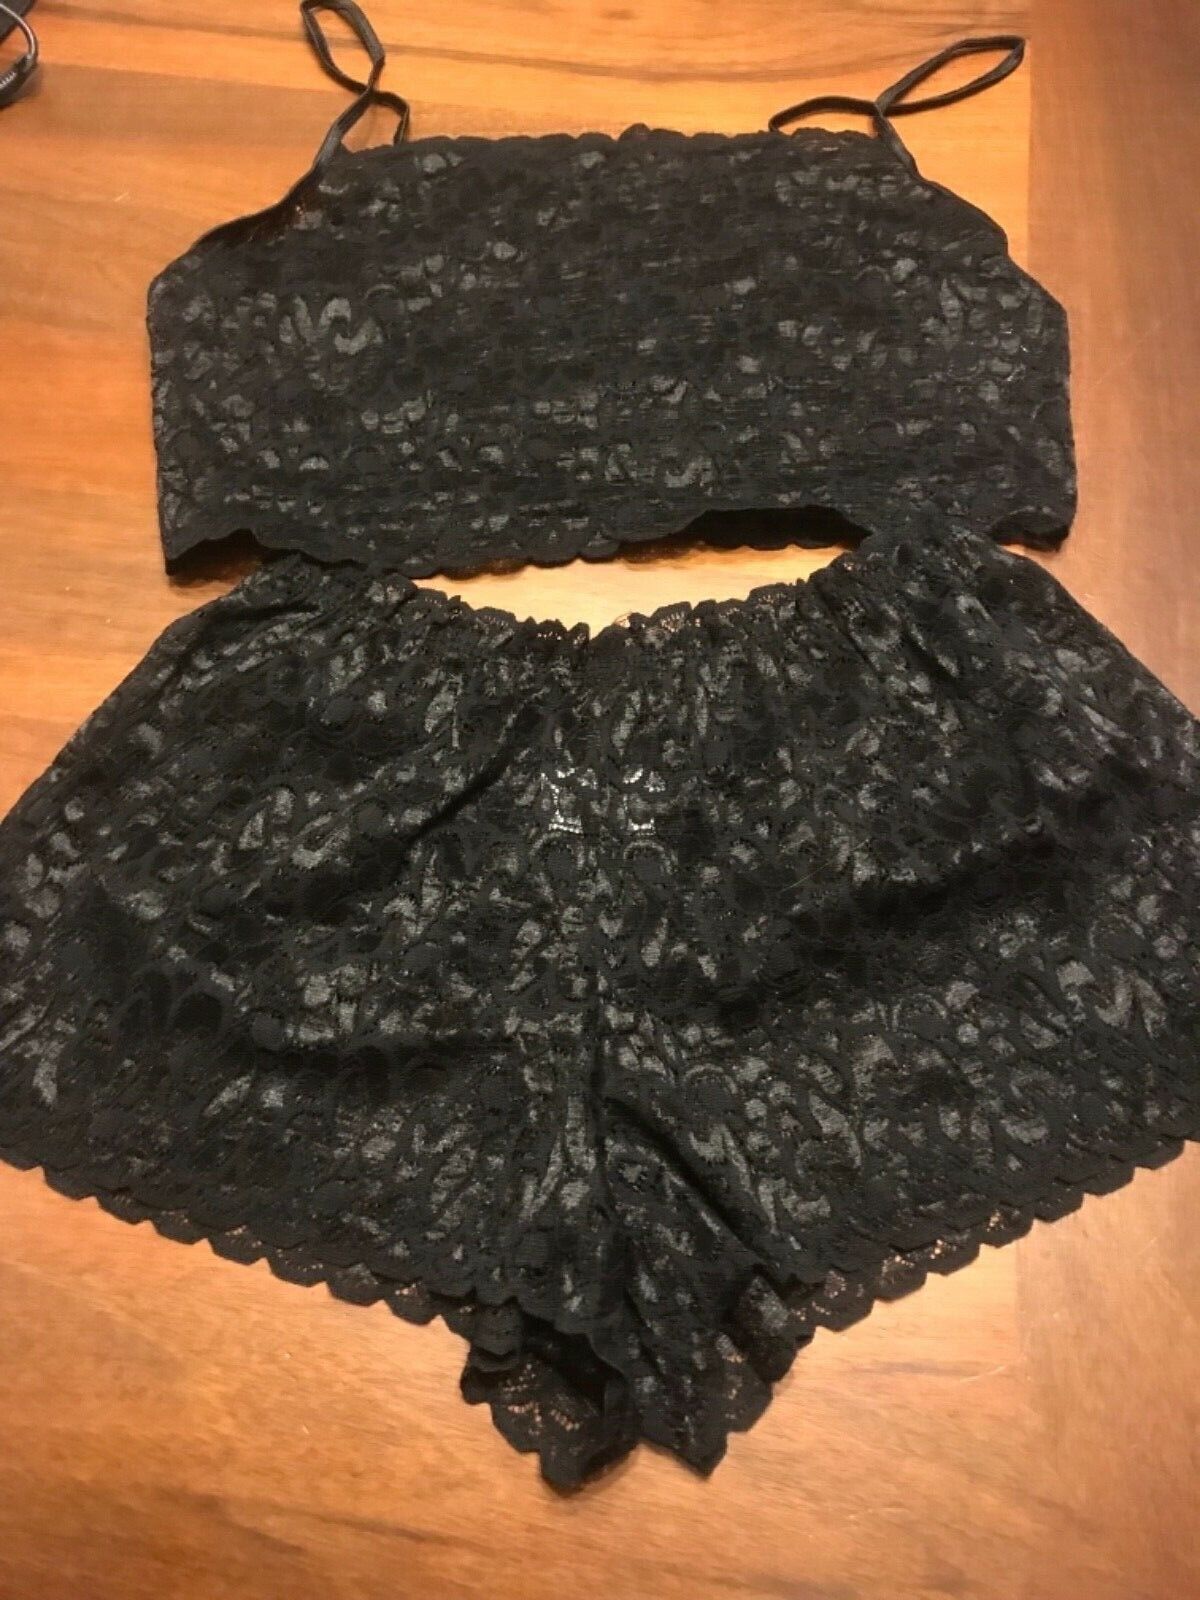 petra fashions lacey lingerie size large black or pink